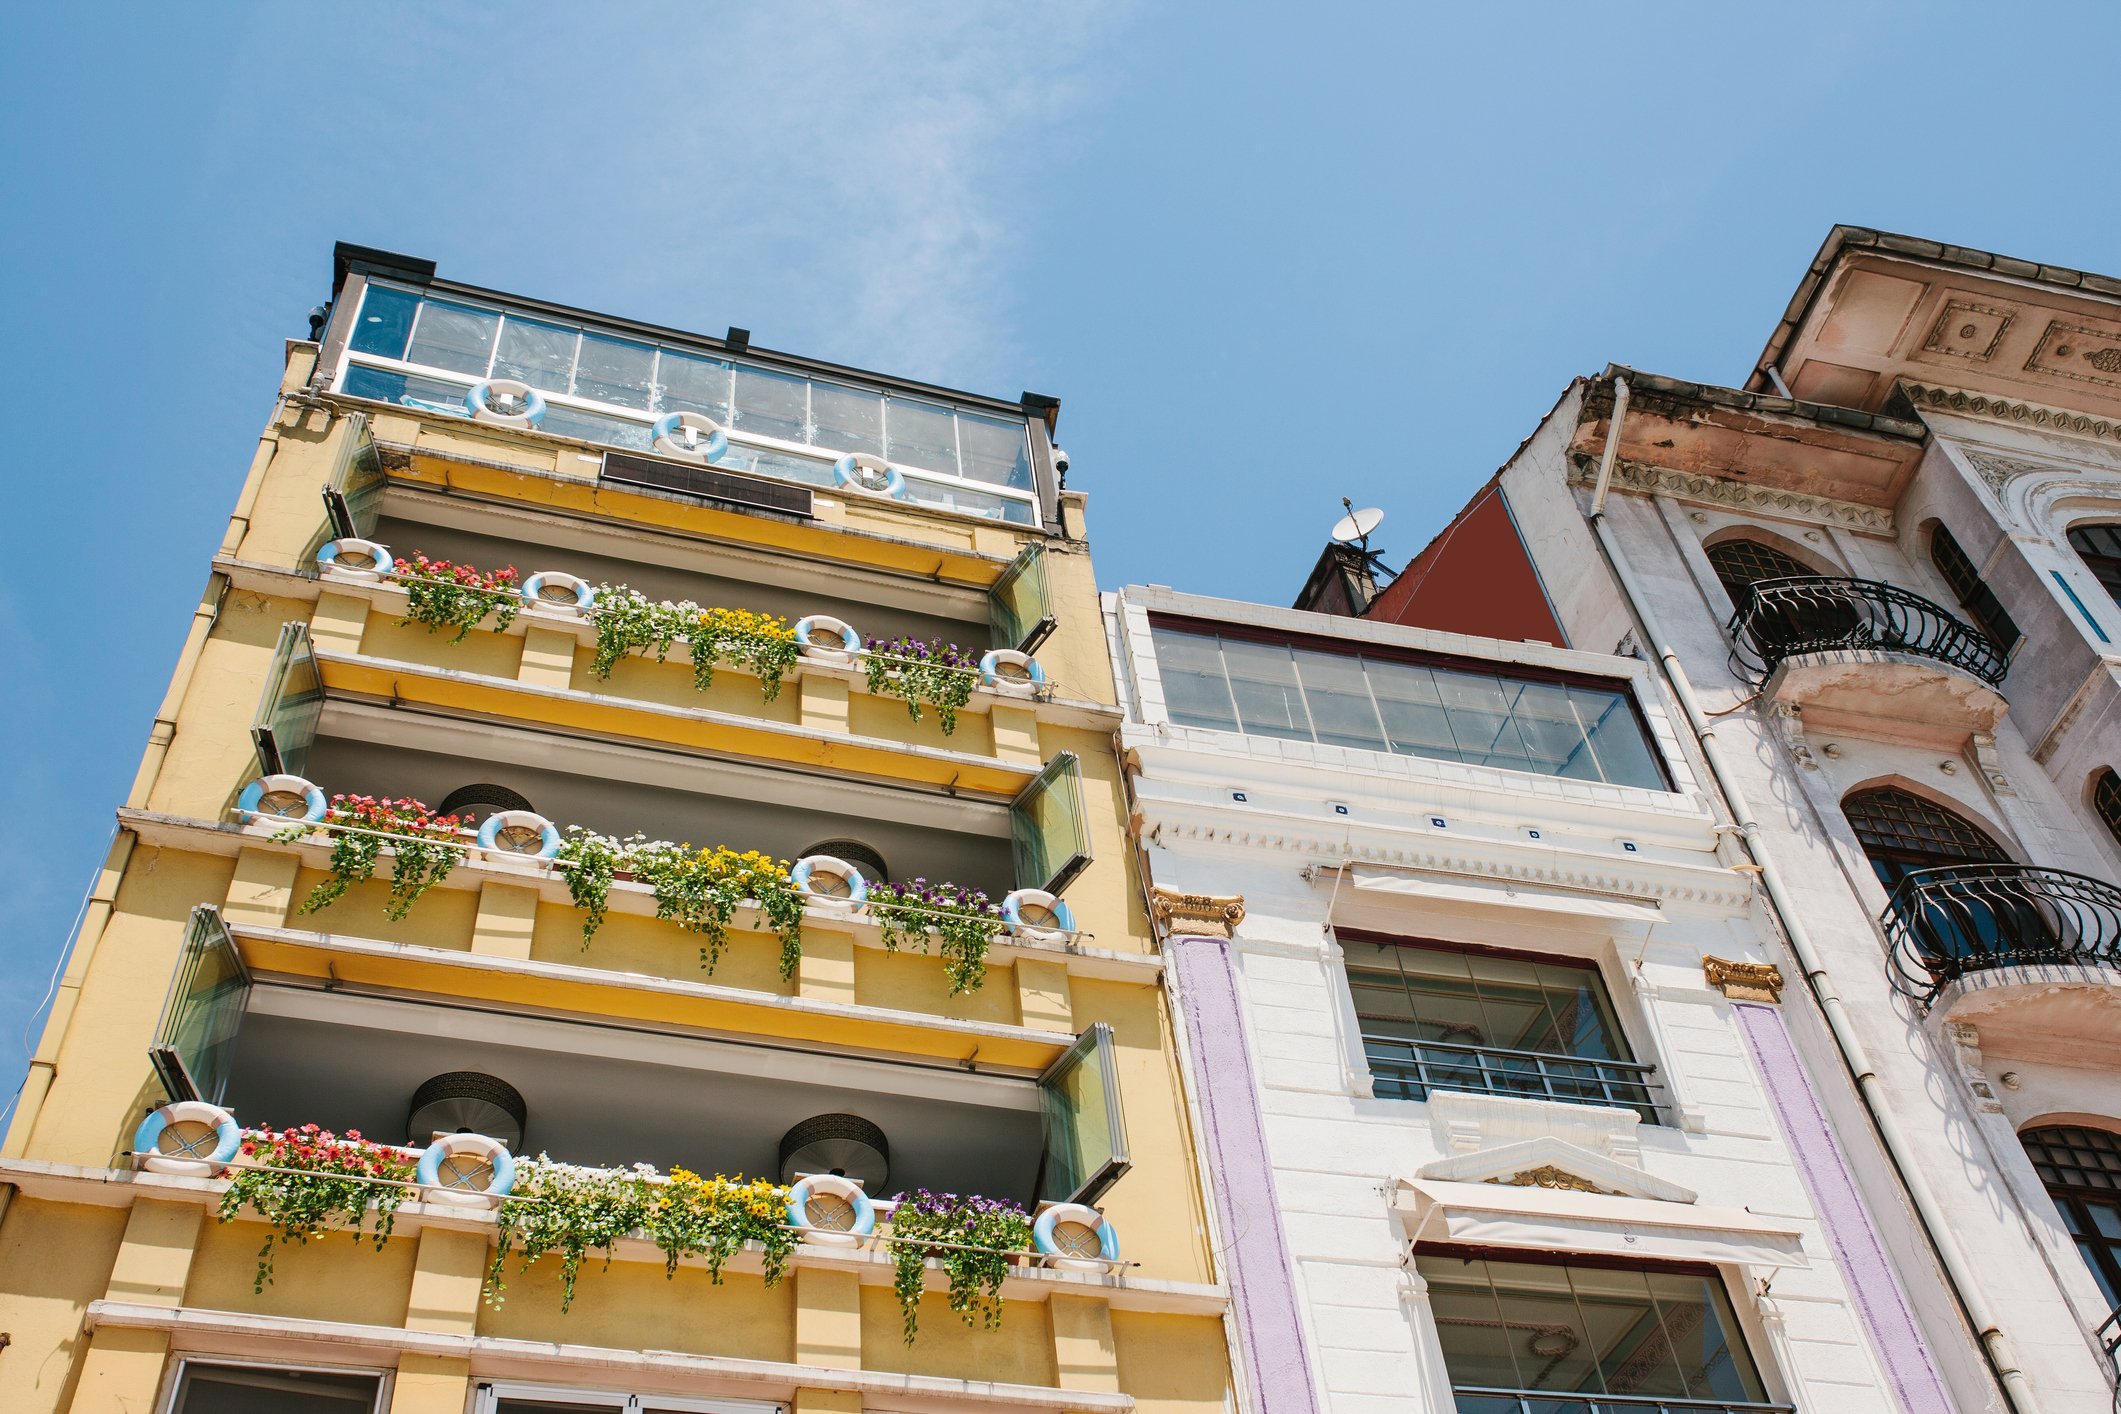 Istanbul may be mostly a concrete jungle but plants on balconies help make it feel much more homely. (iStock Photo)